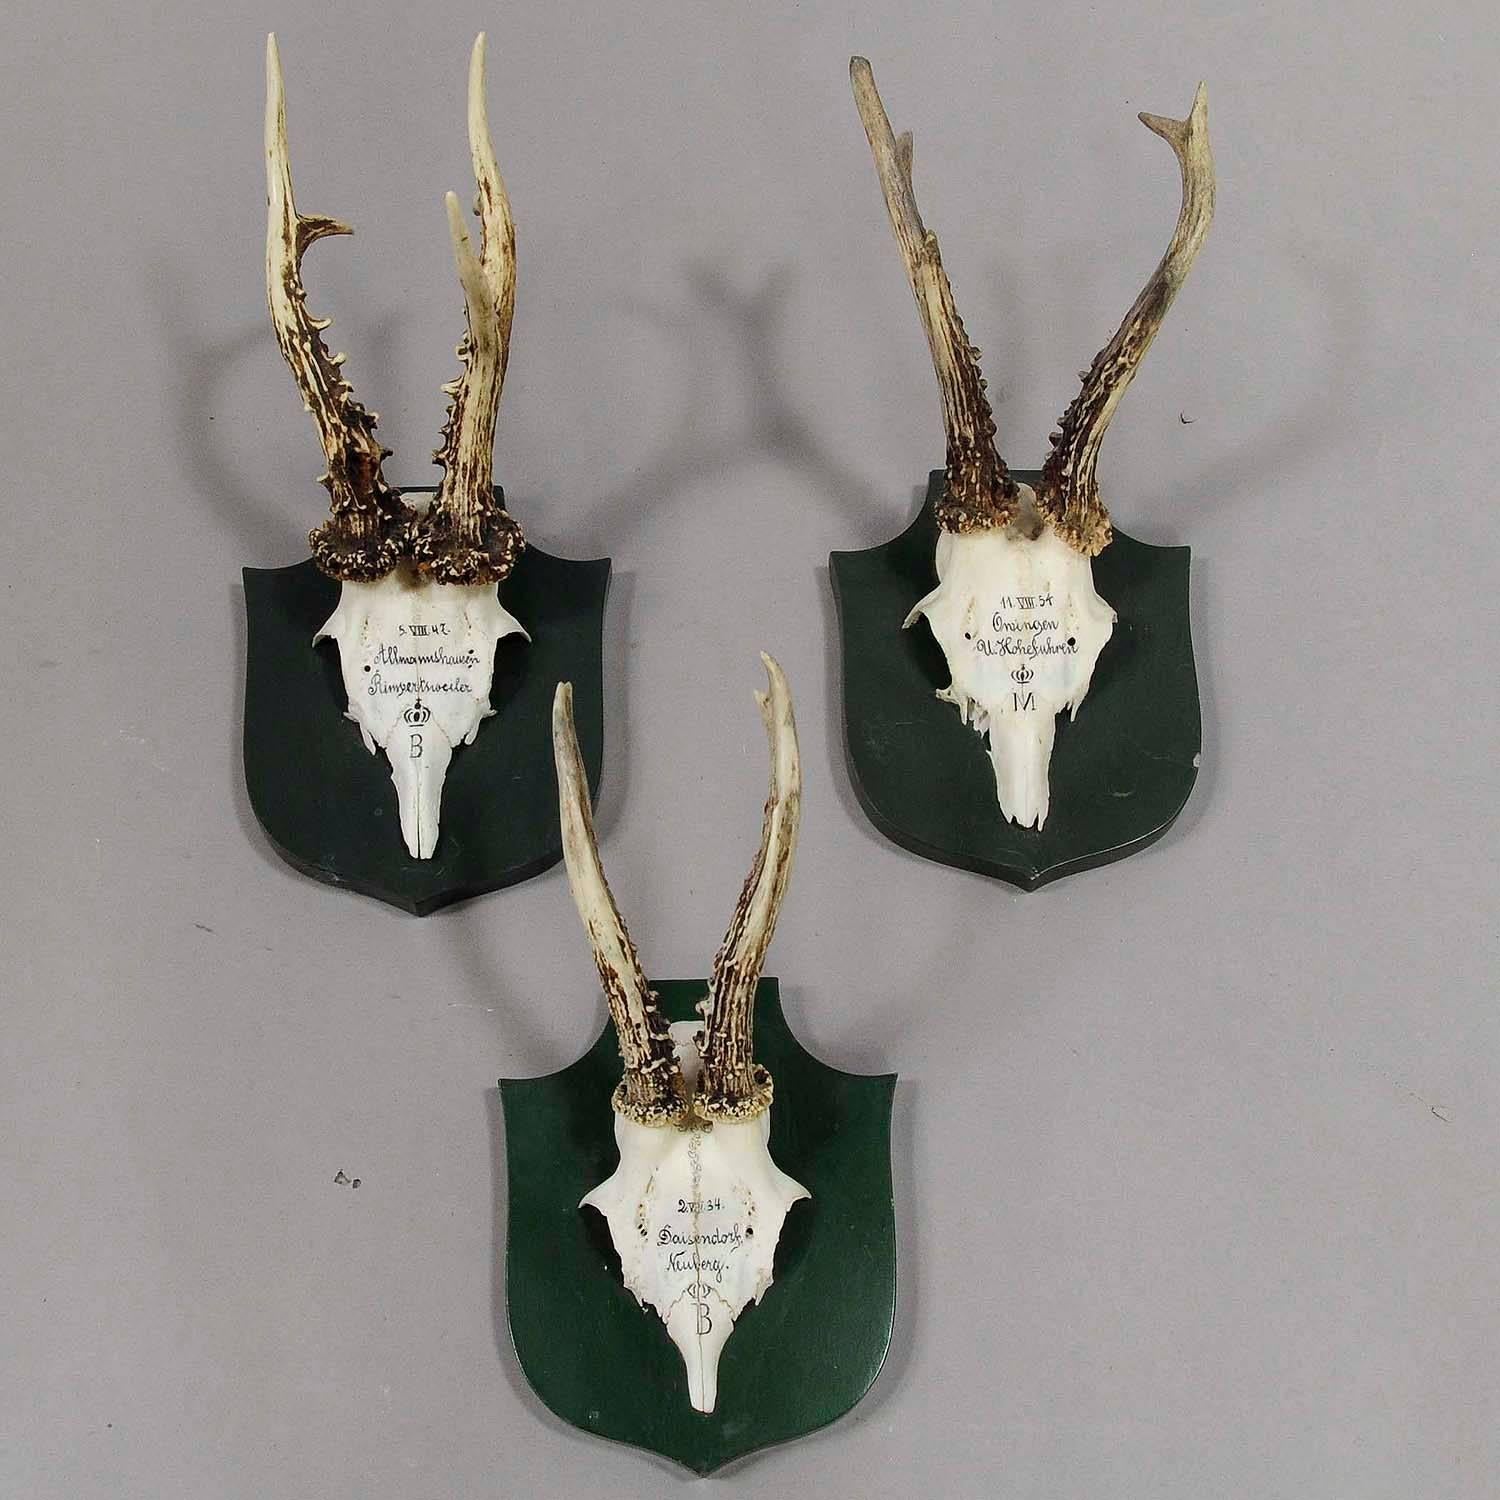 Rustic Great Deer Trophies on Plaques from Palace Salem, Germany